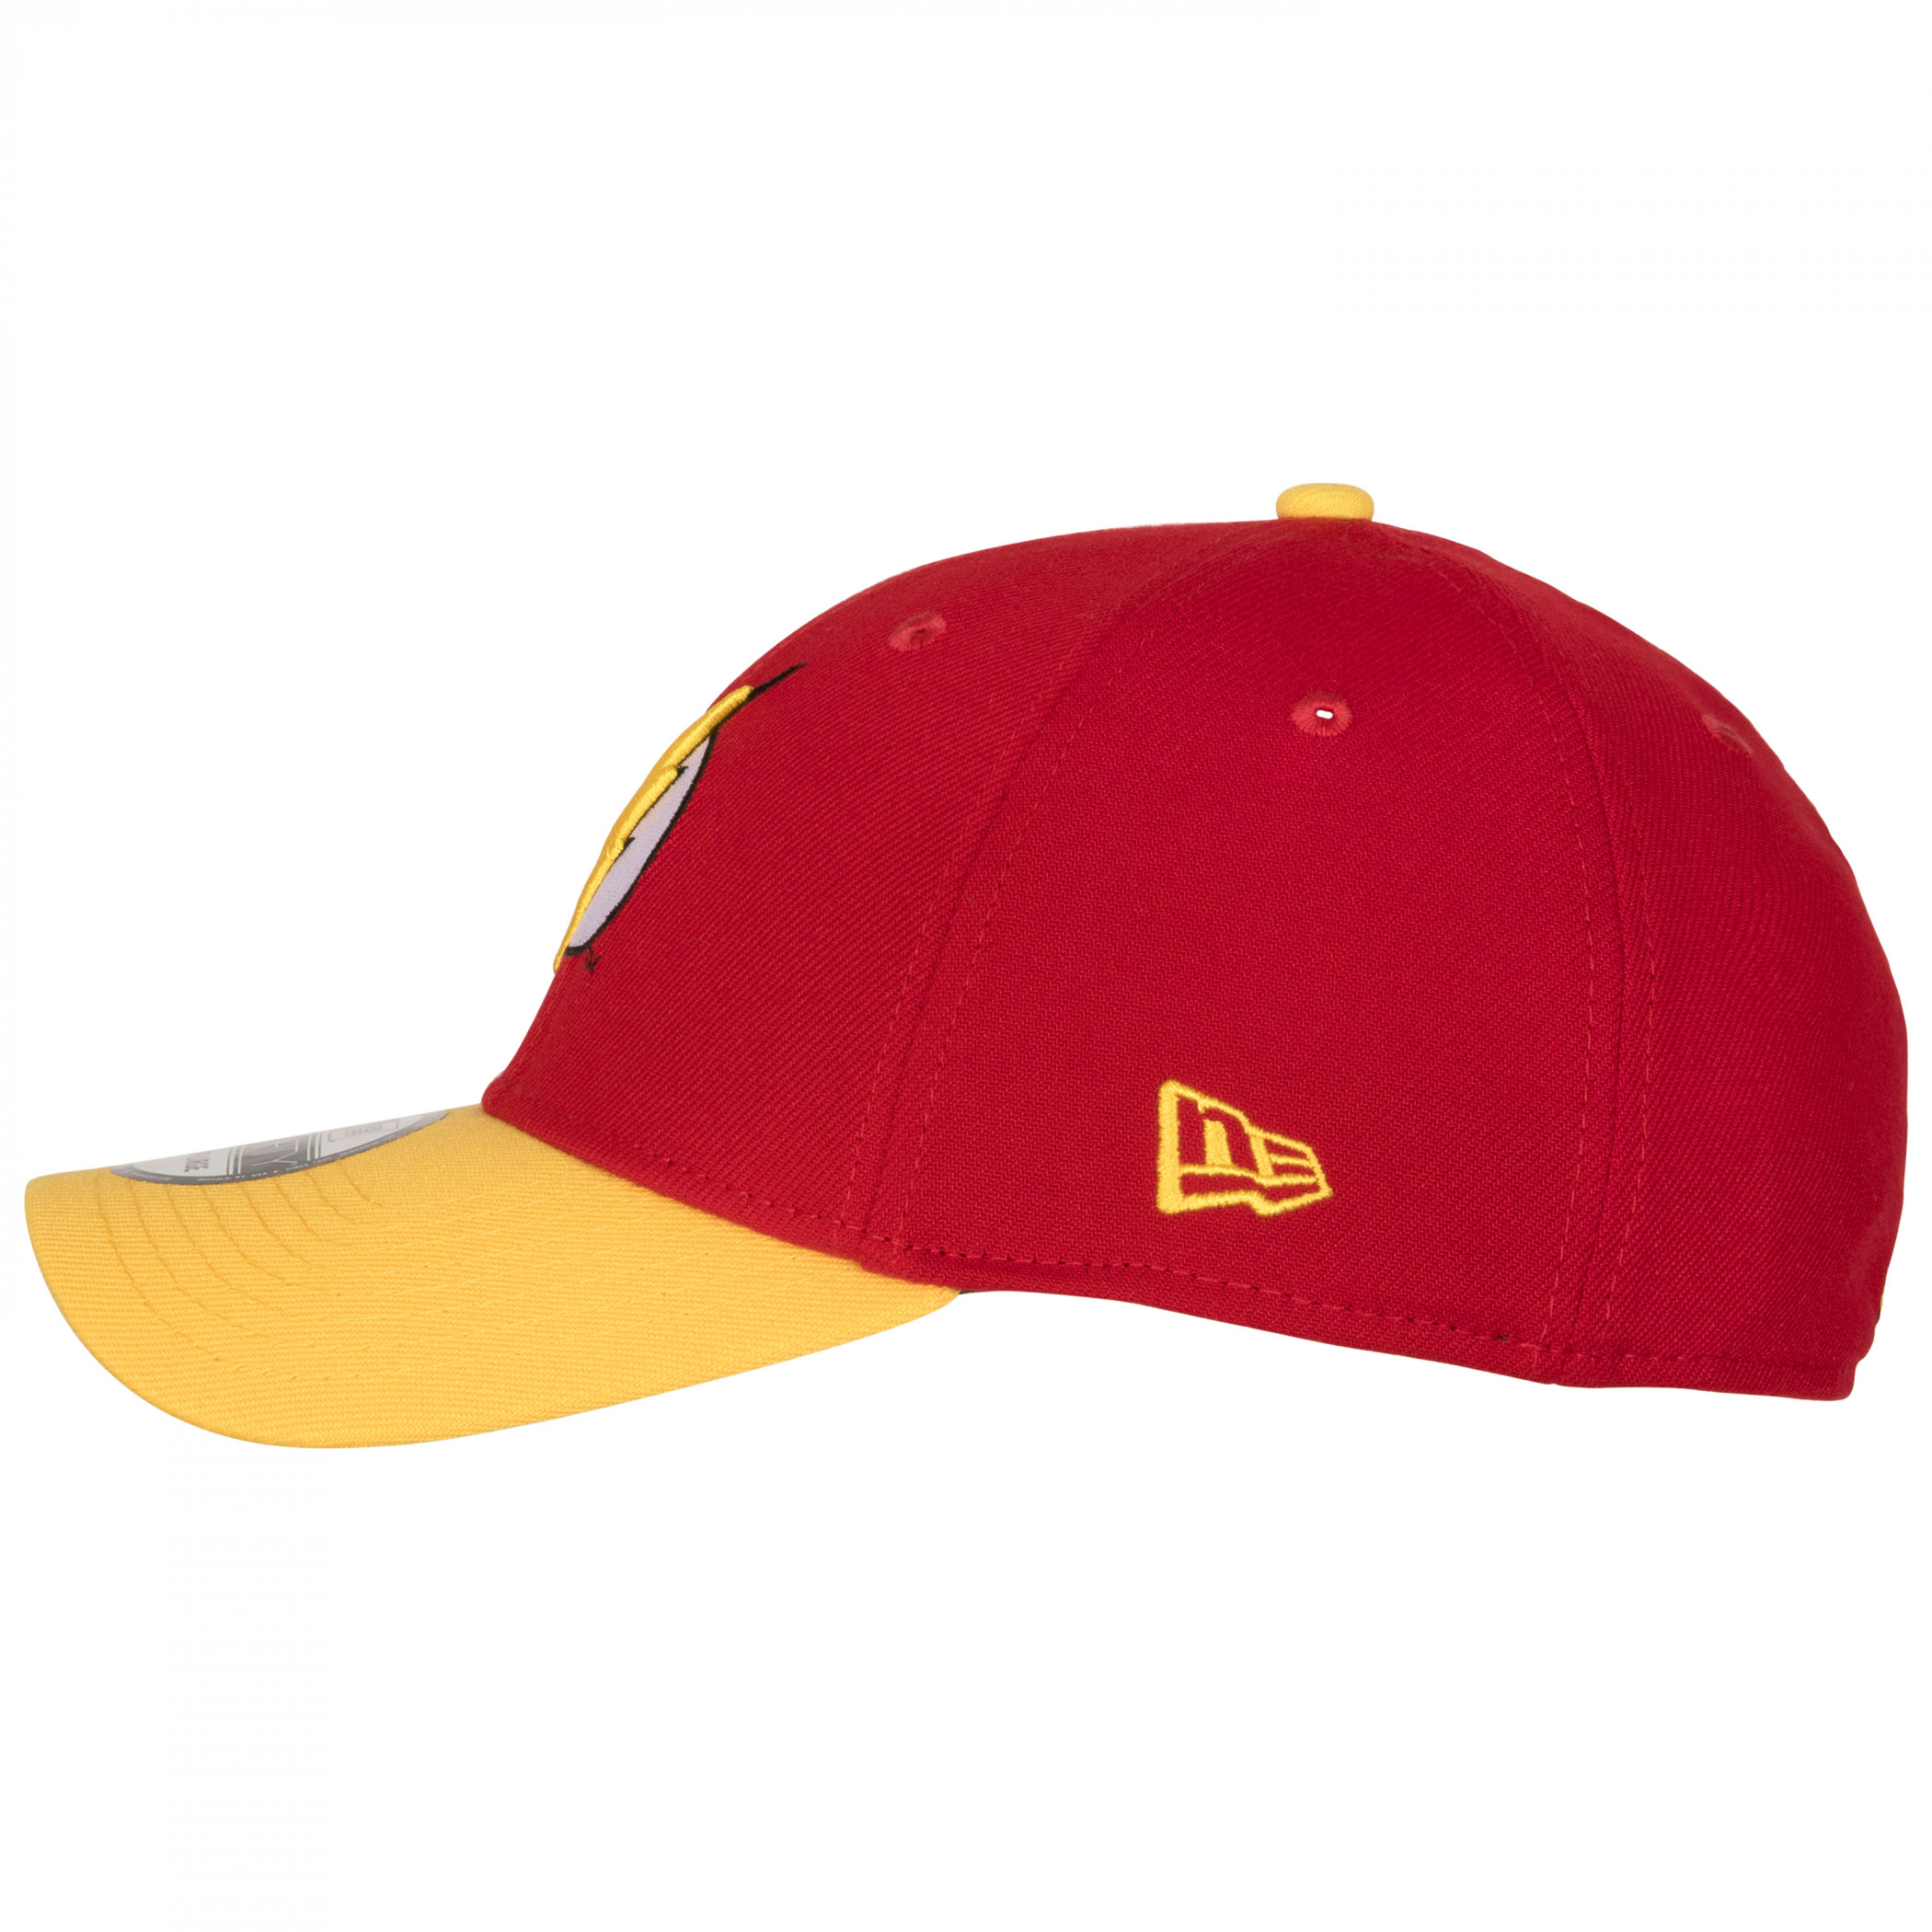 Flash Red and Yellow Colorway New Era 39Thirty Fitted Hat